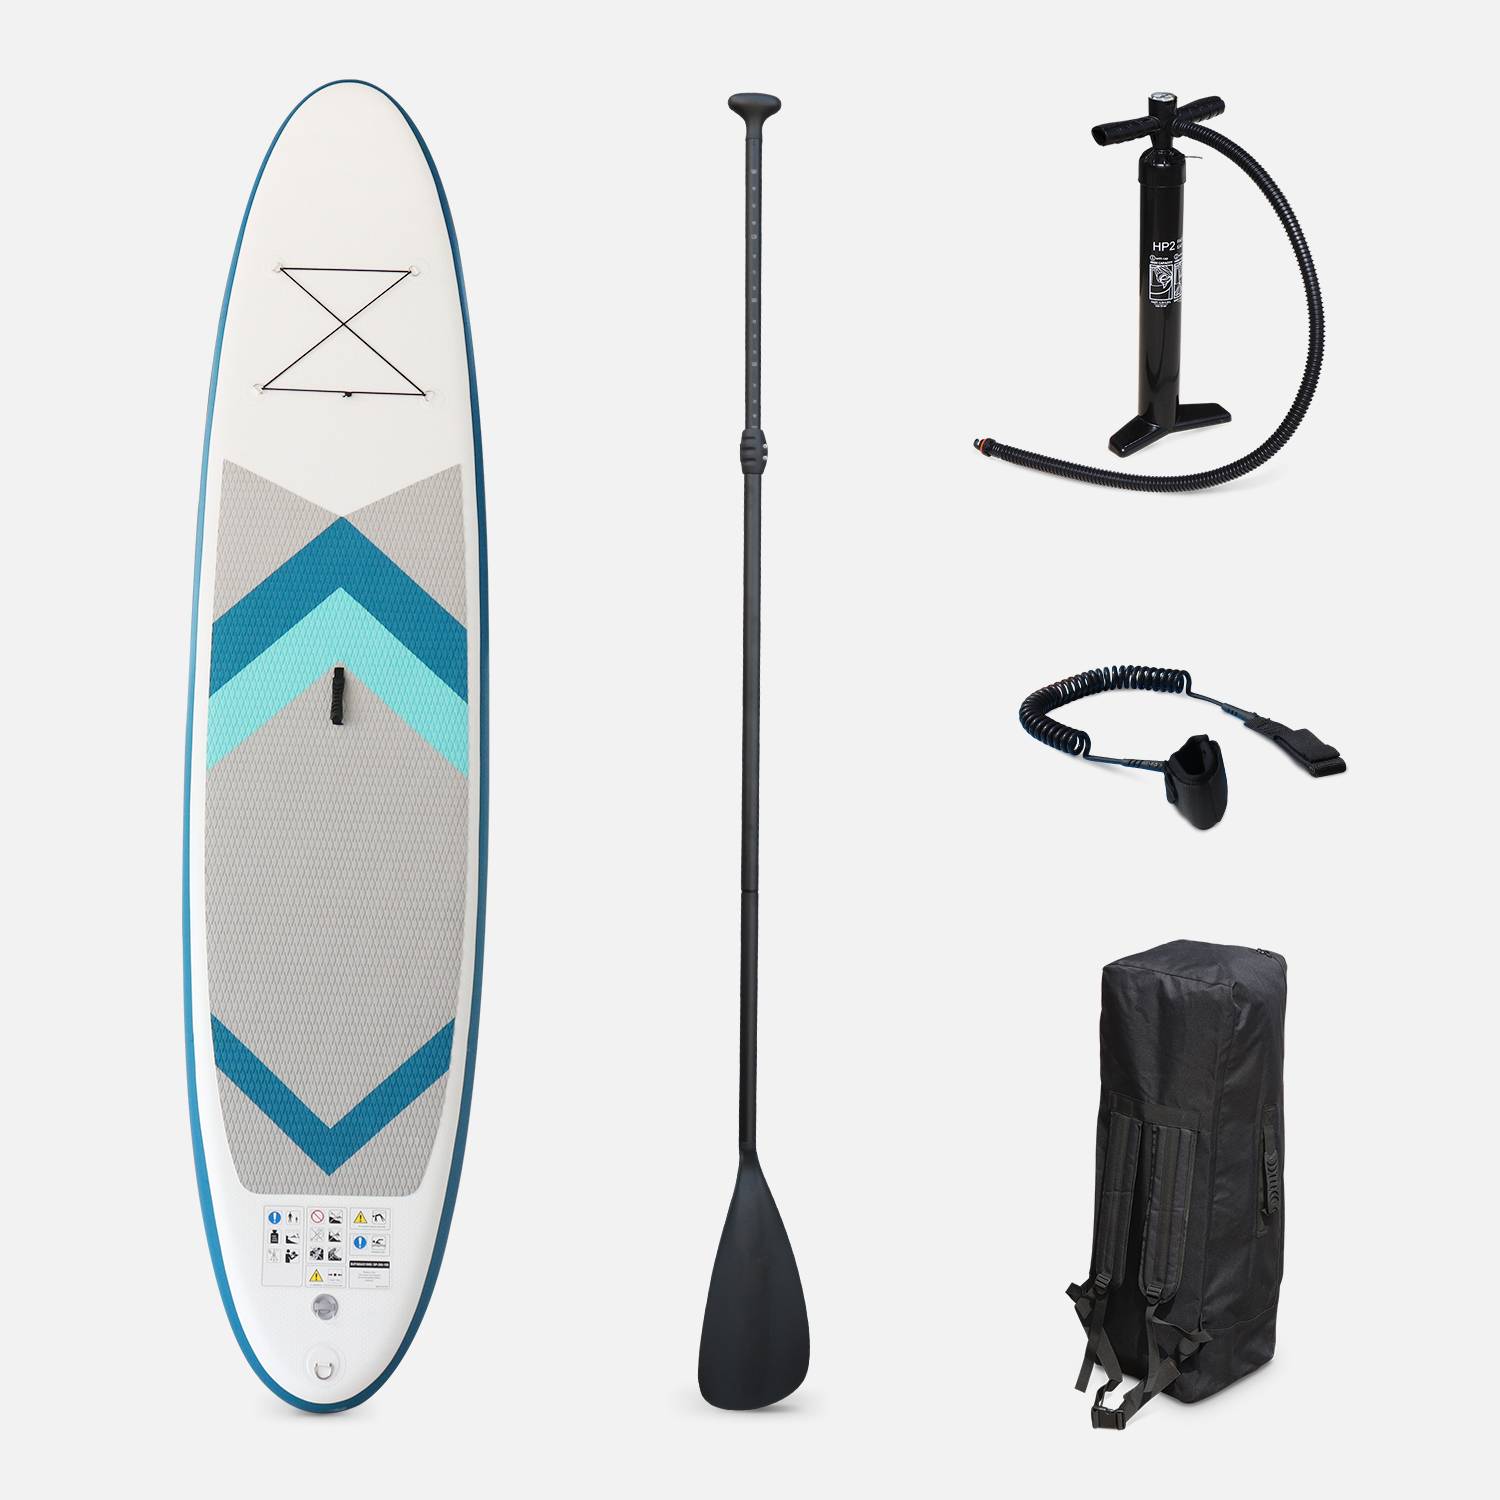 11.8FT Inflatable Stand Up Paddle Board - SUP kit with double-action high-pressure pump, paddle, leash and carry bag - Lio - Blue Photo1